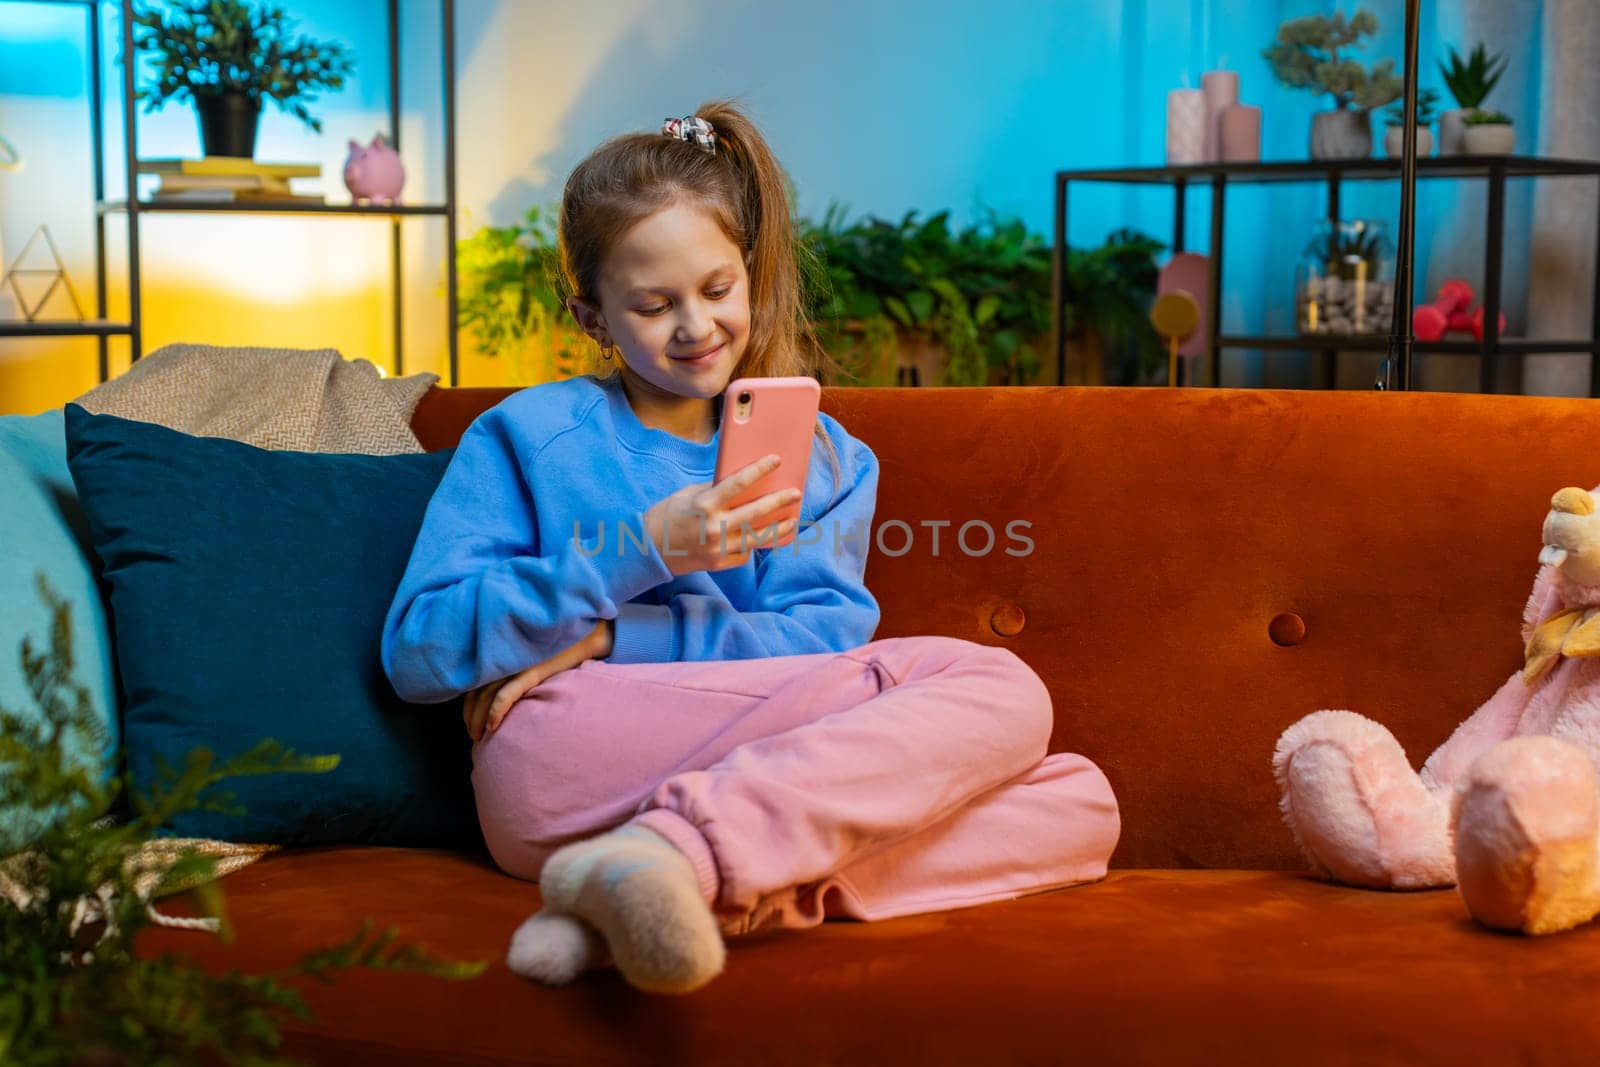 Young child girl texting share messages content on smartphone social media applications online, watching relax movie. Female teenager kid uses mobile phone at home in evening night room sits on sofa